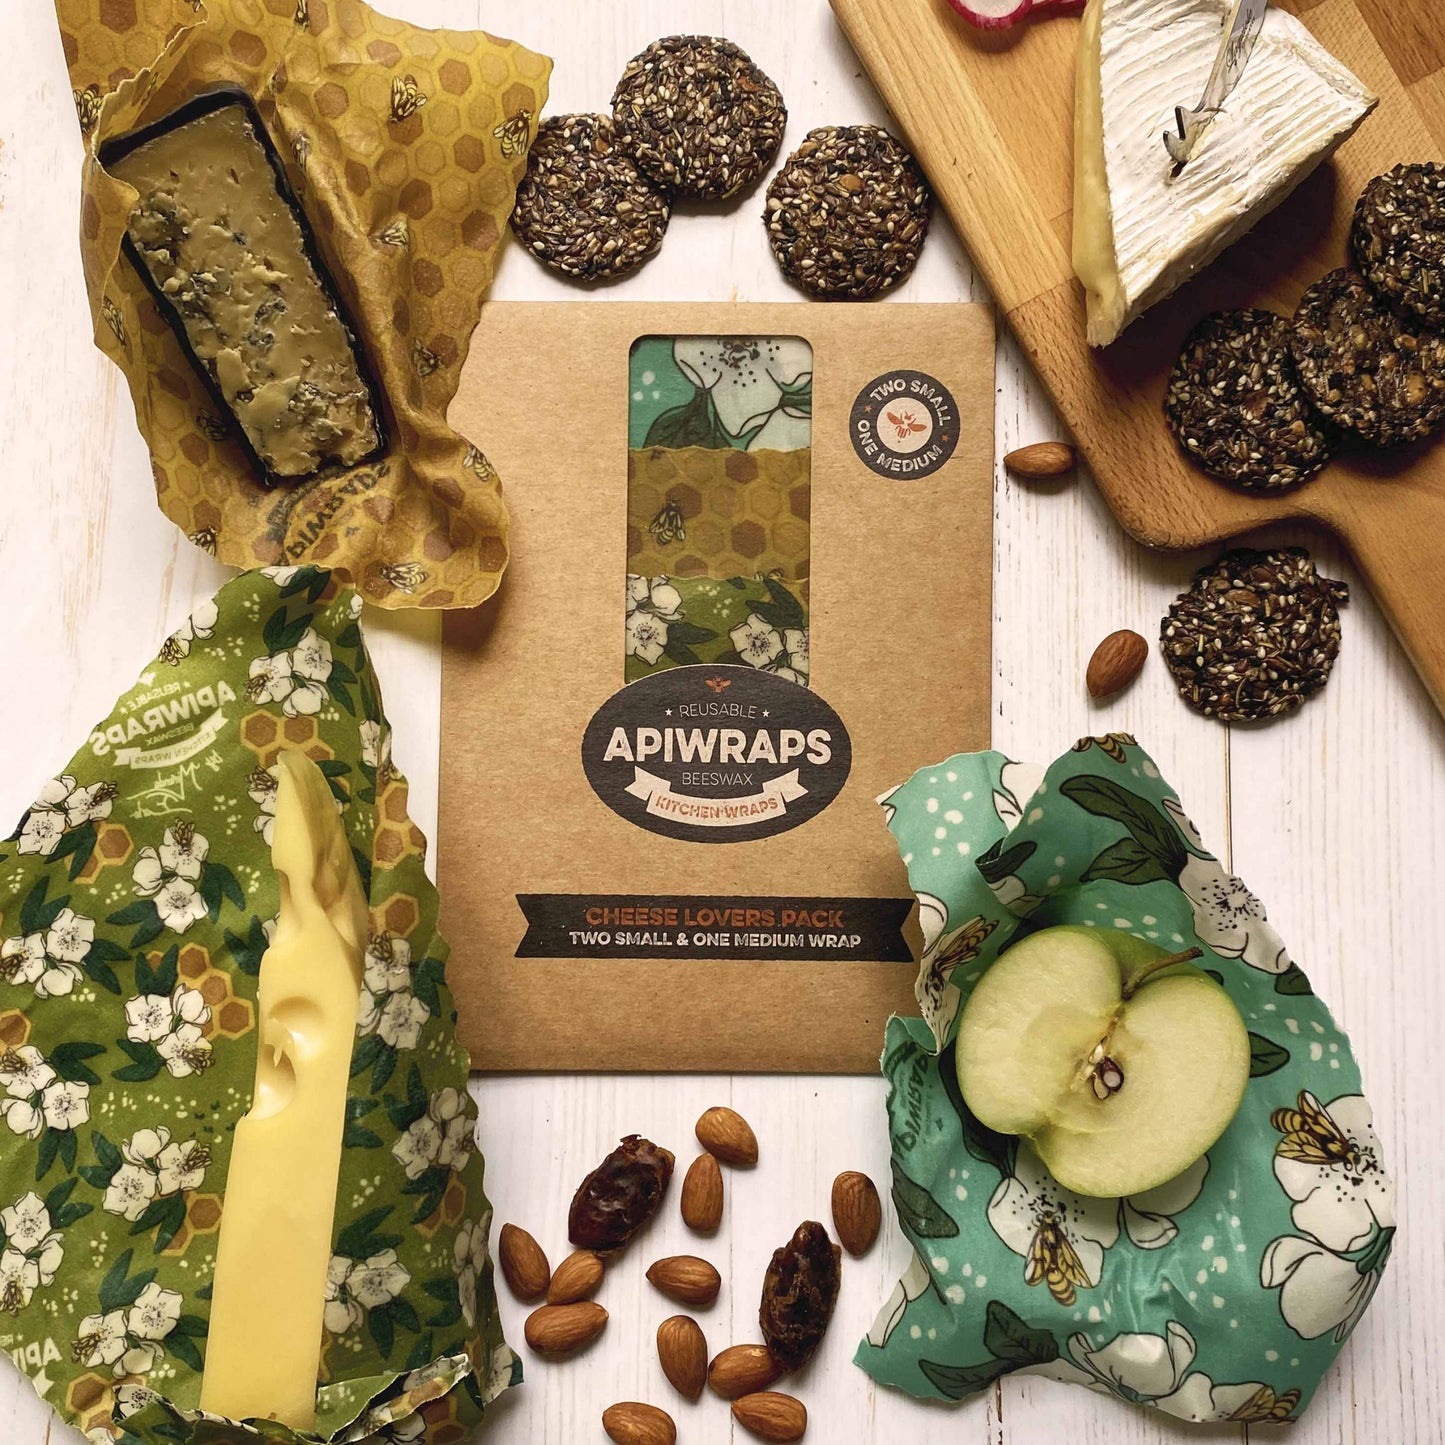 Apiwraps Beeswax Wraps Cheese Lovers